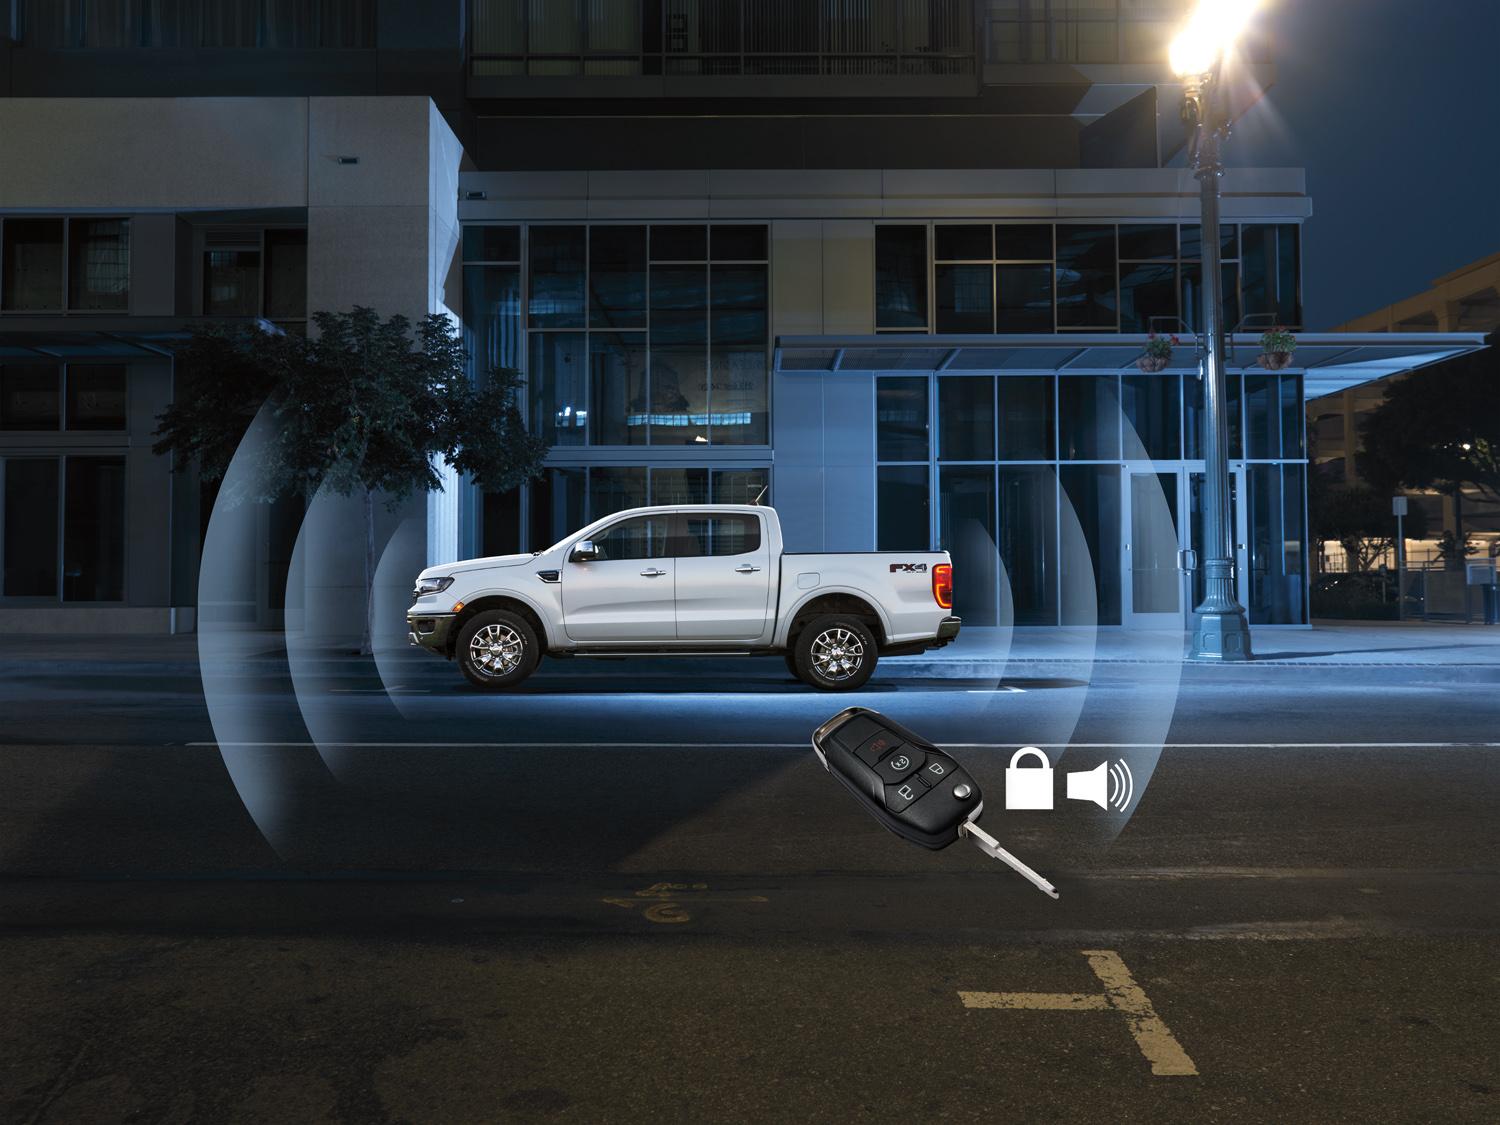 Image for Vehicle Security System - Ford Perimeter Plus from AccessoriesCanada